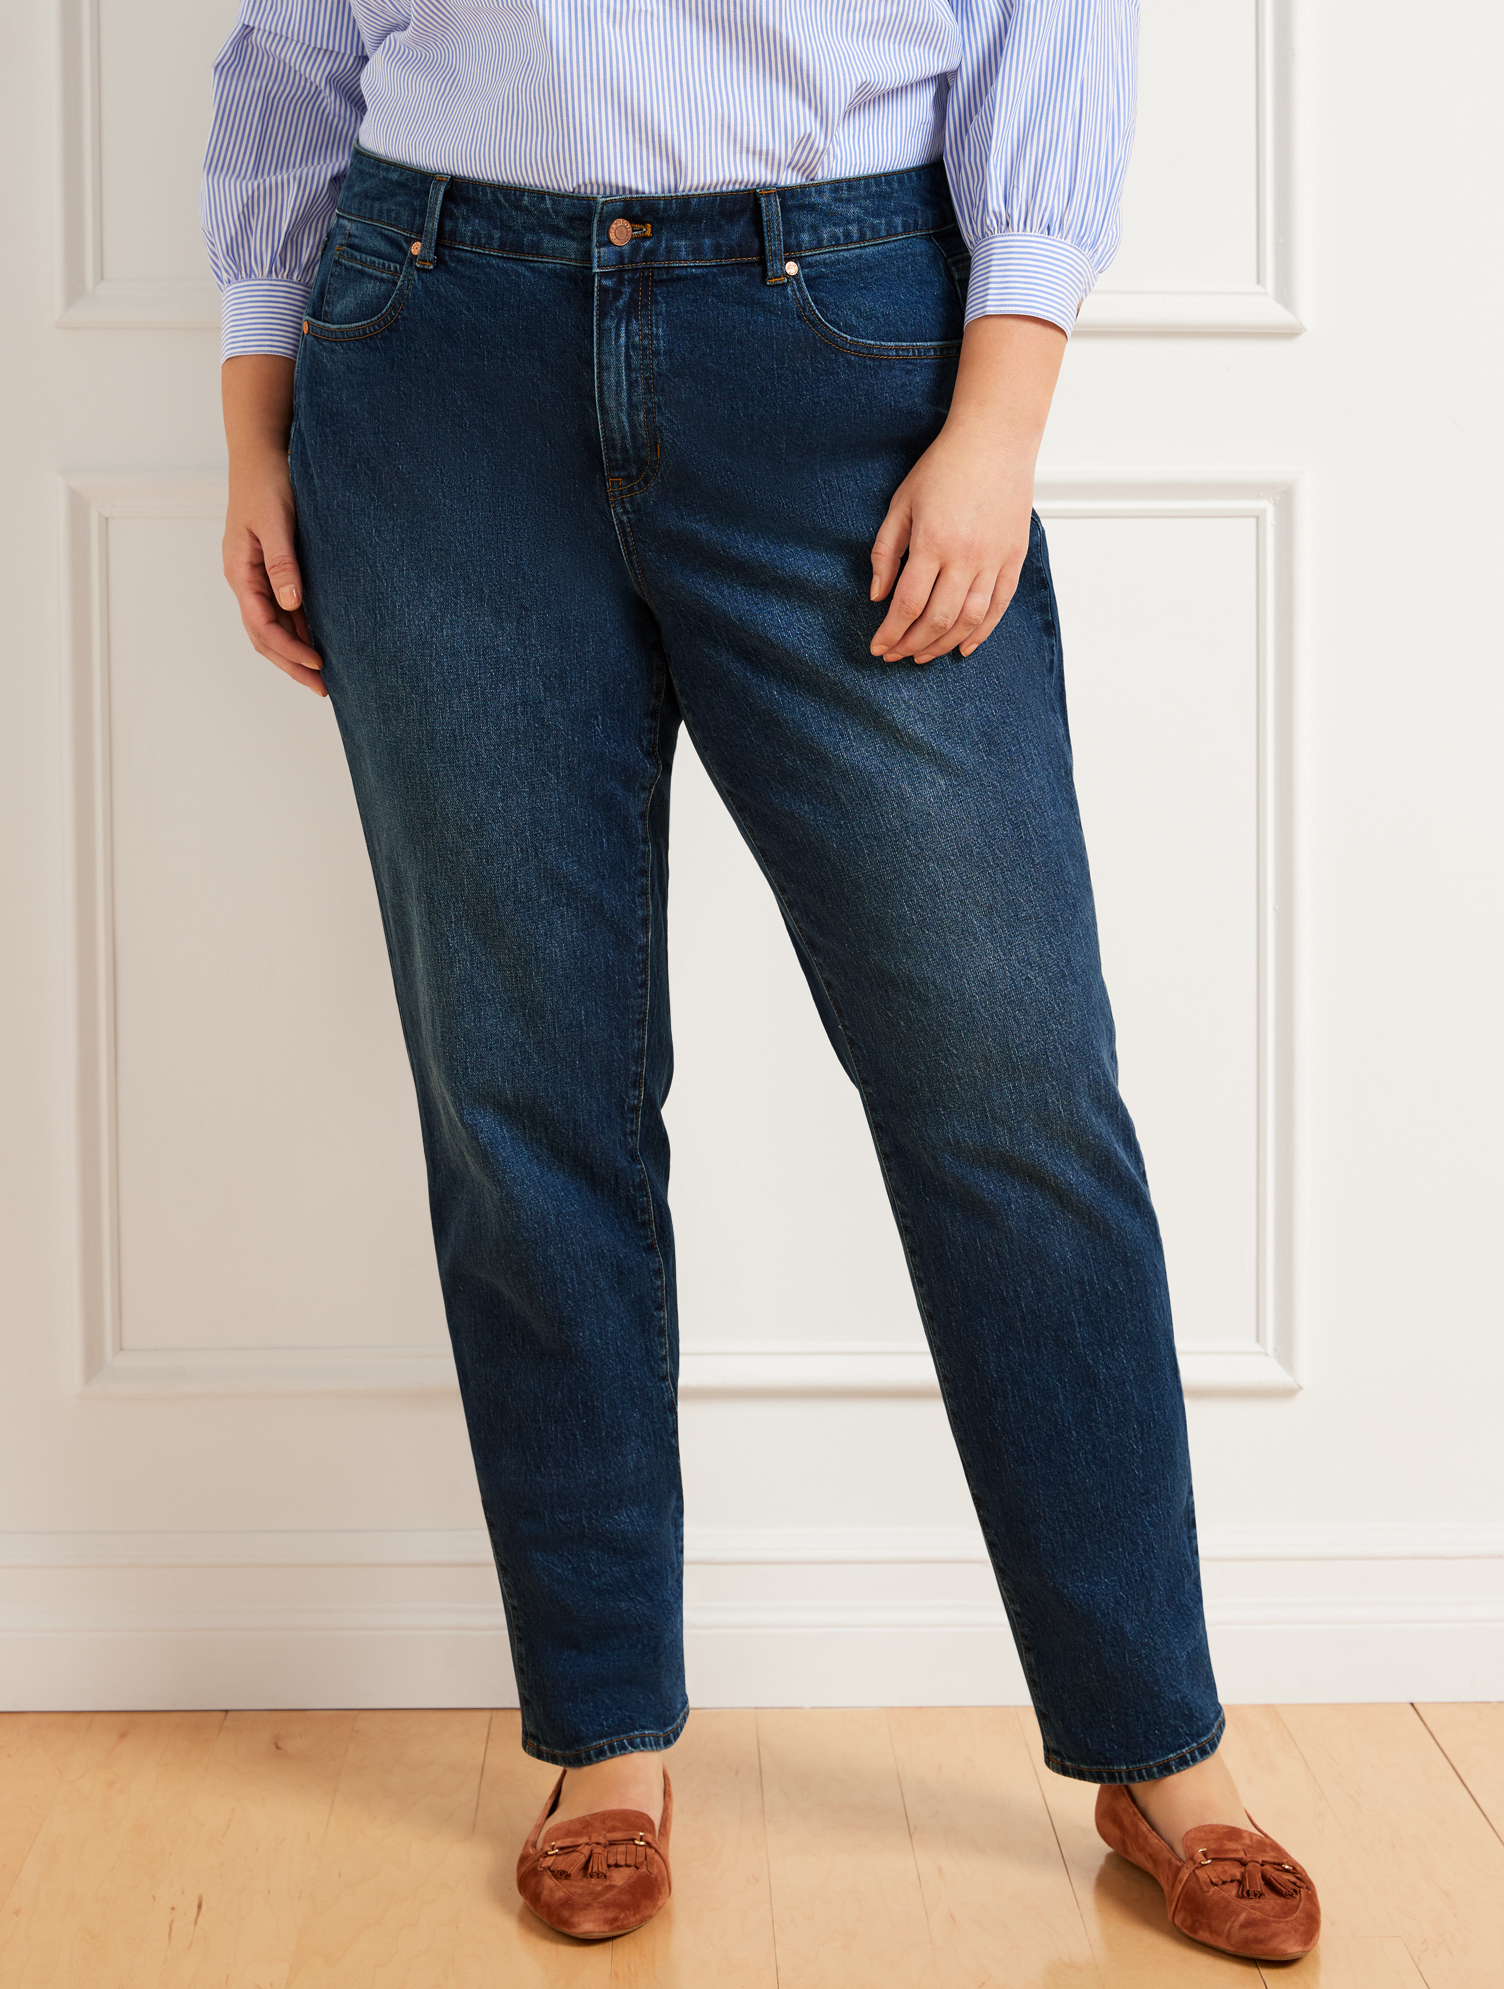 Talbots Plus Size - High Waist Relaxed Jeans - Huron Wash - 22